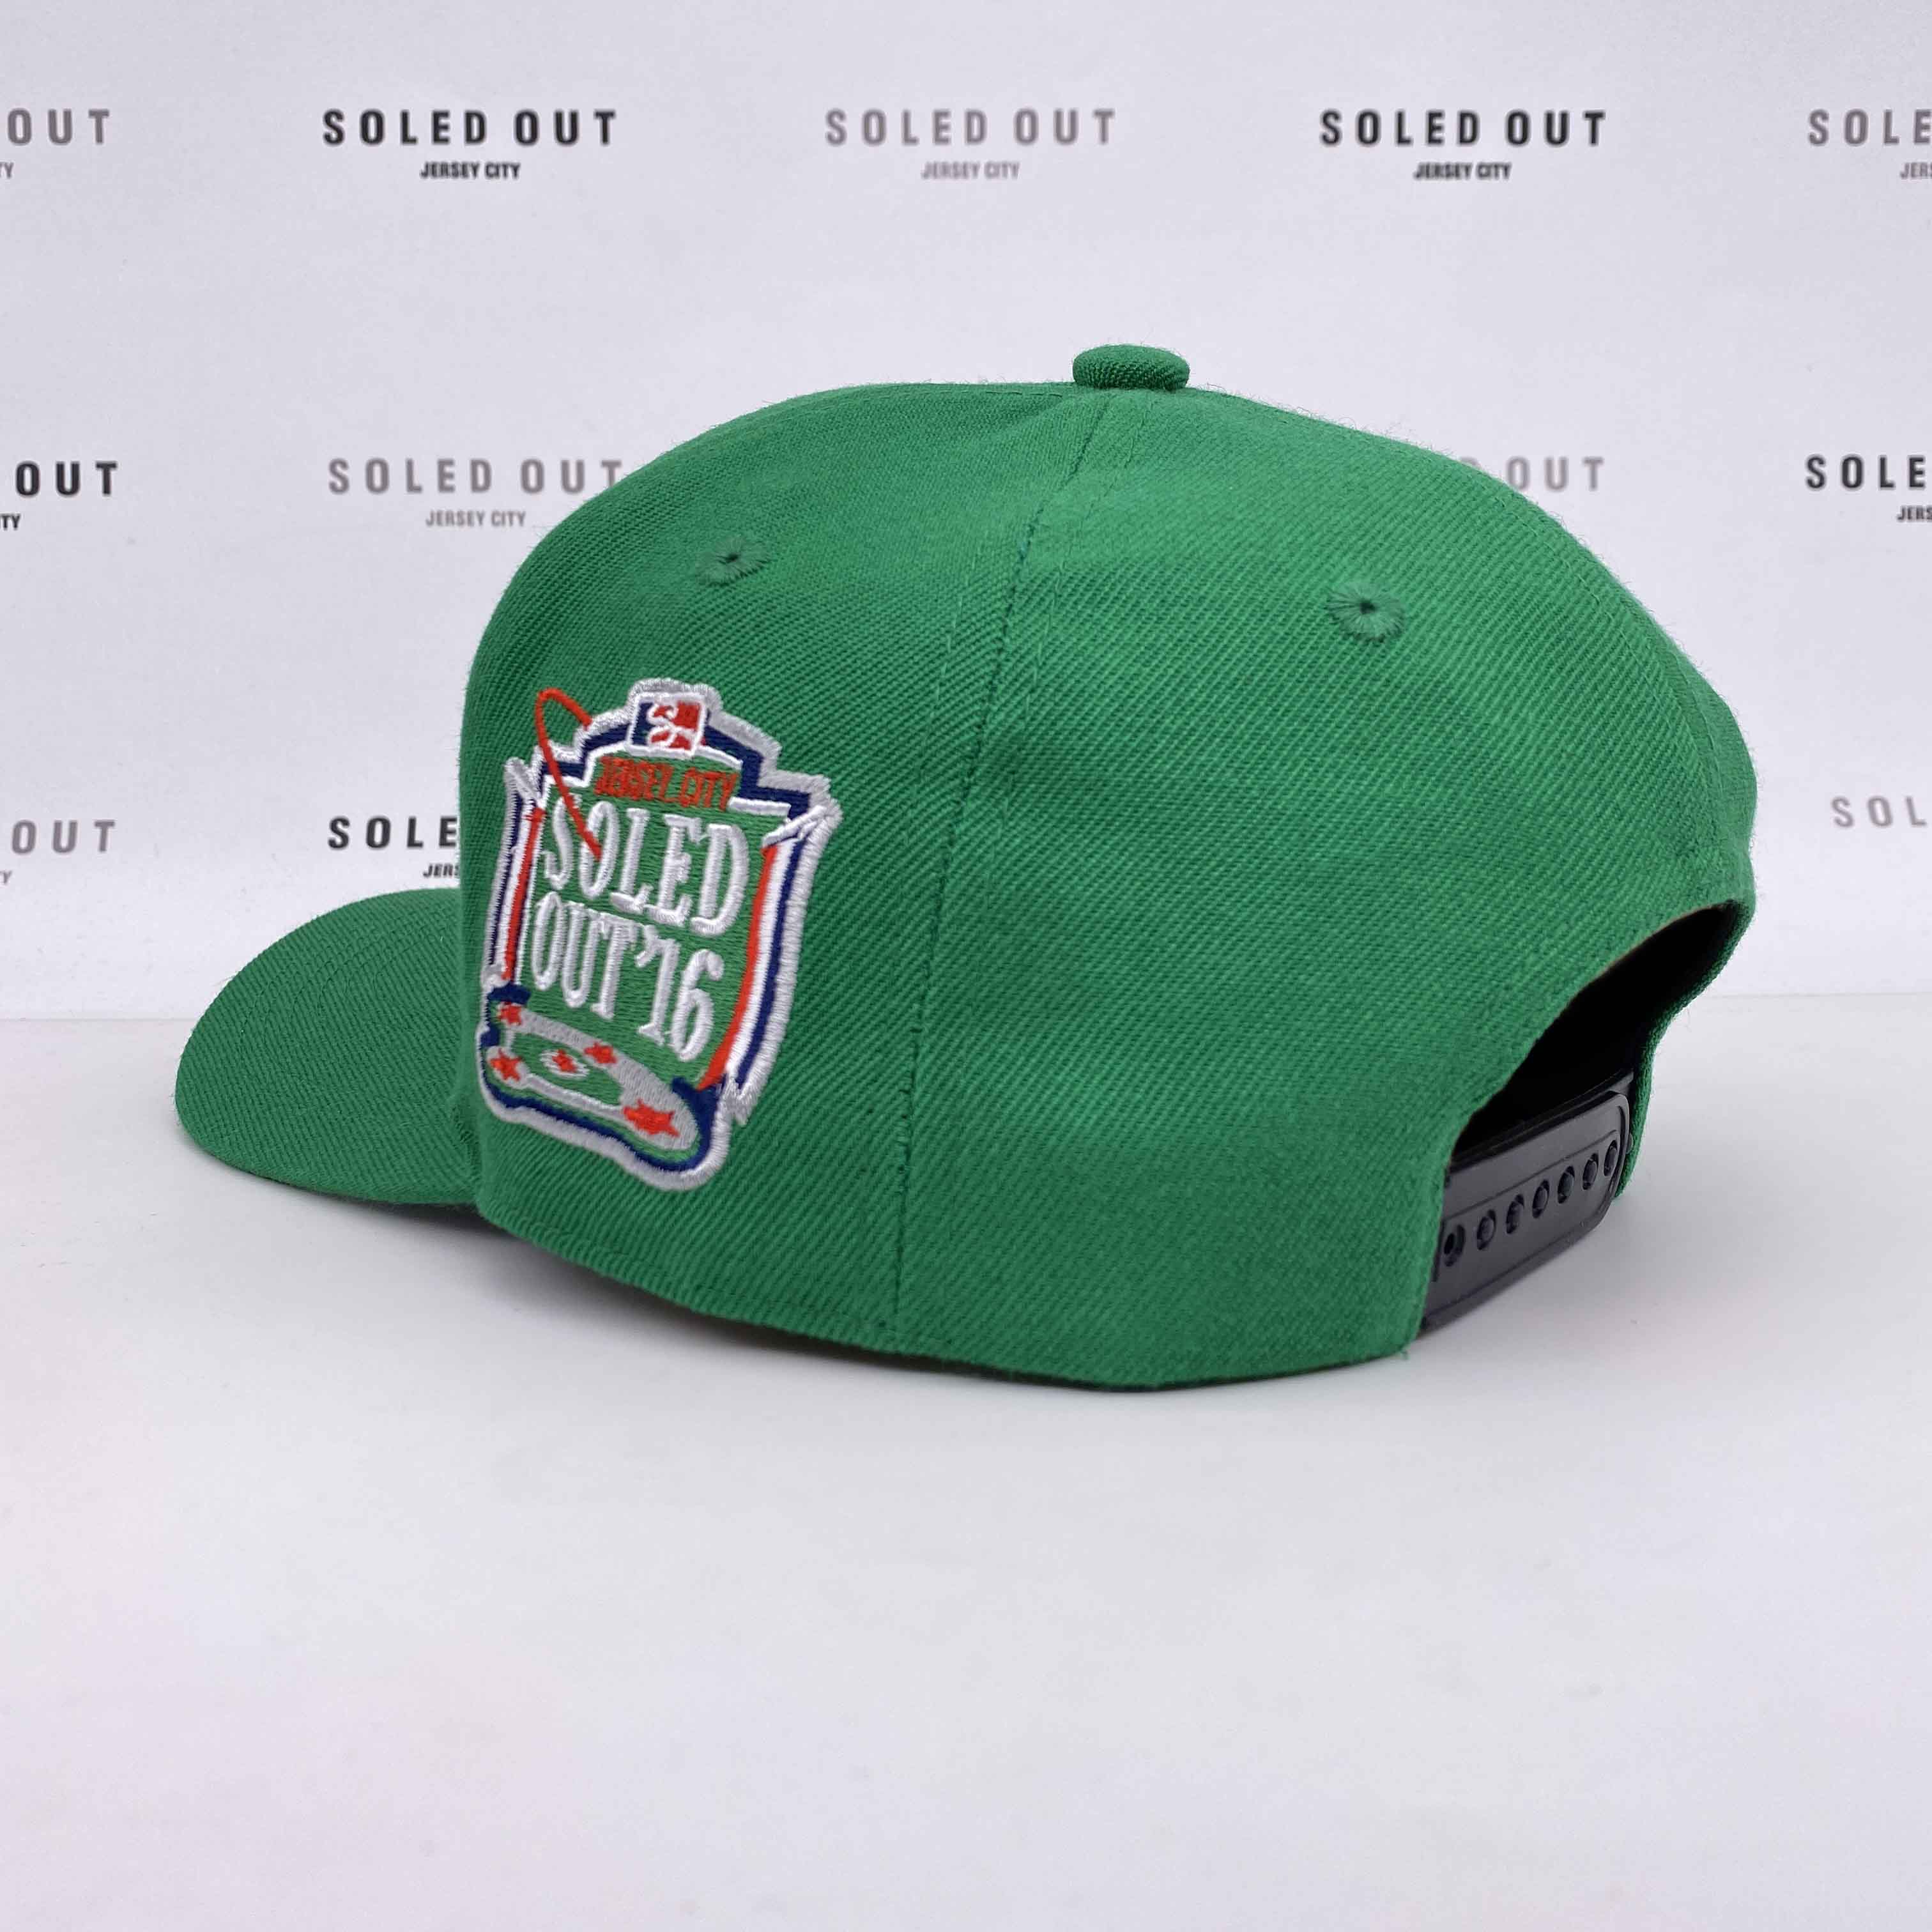 Soled Out Snapback "ACRYLIC WOOL BLEND" New Green Size OS